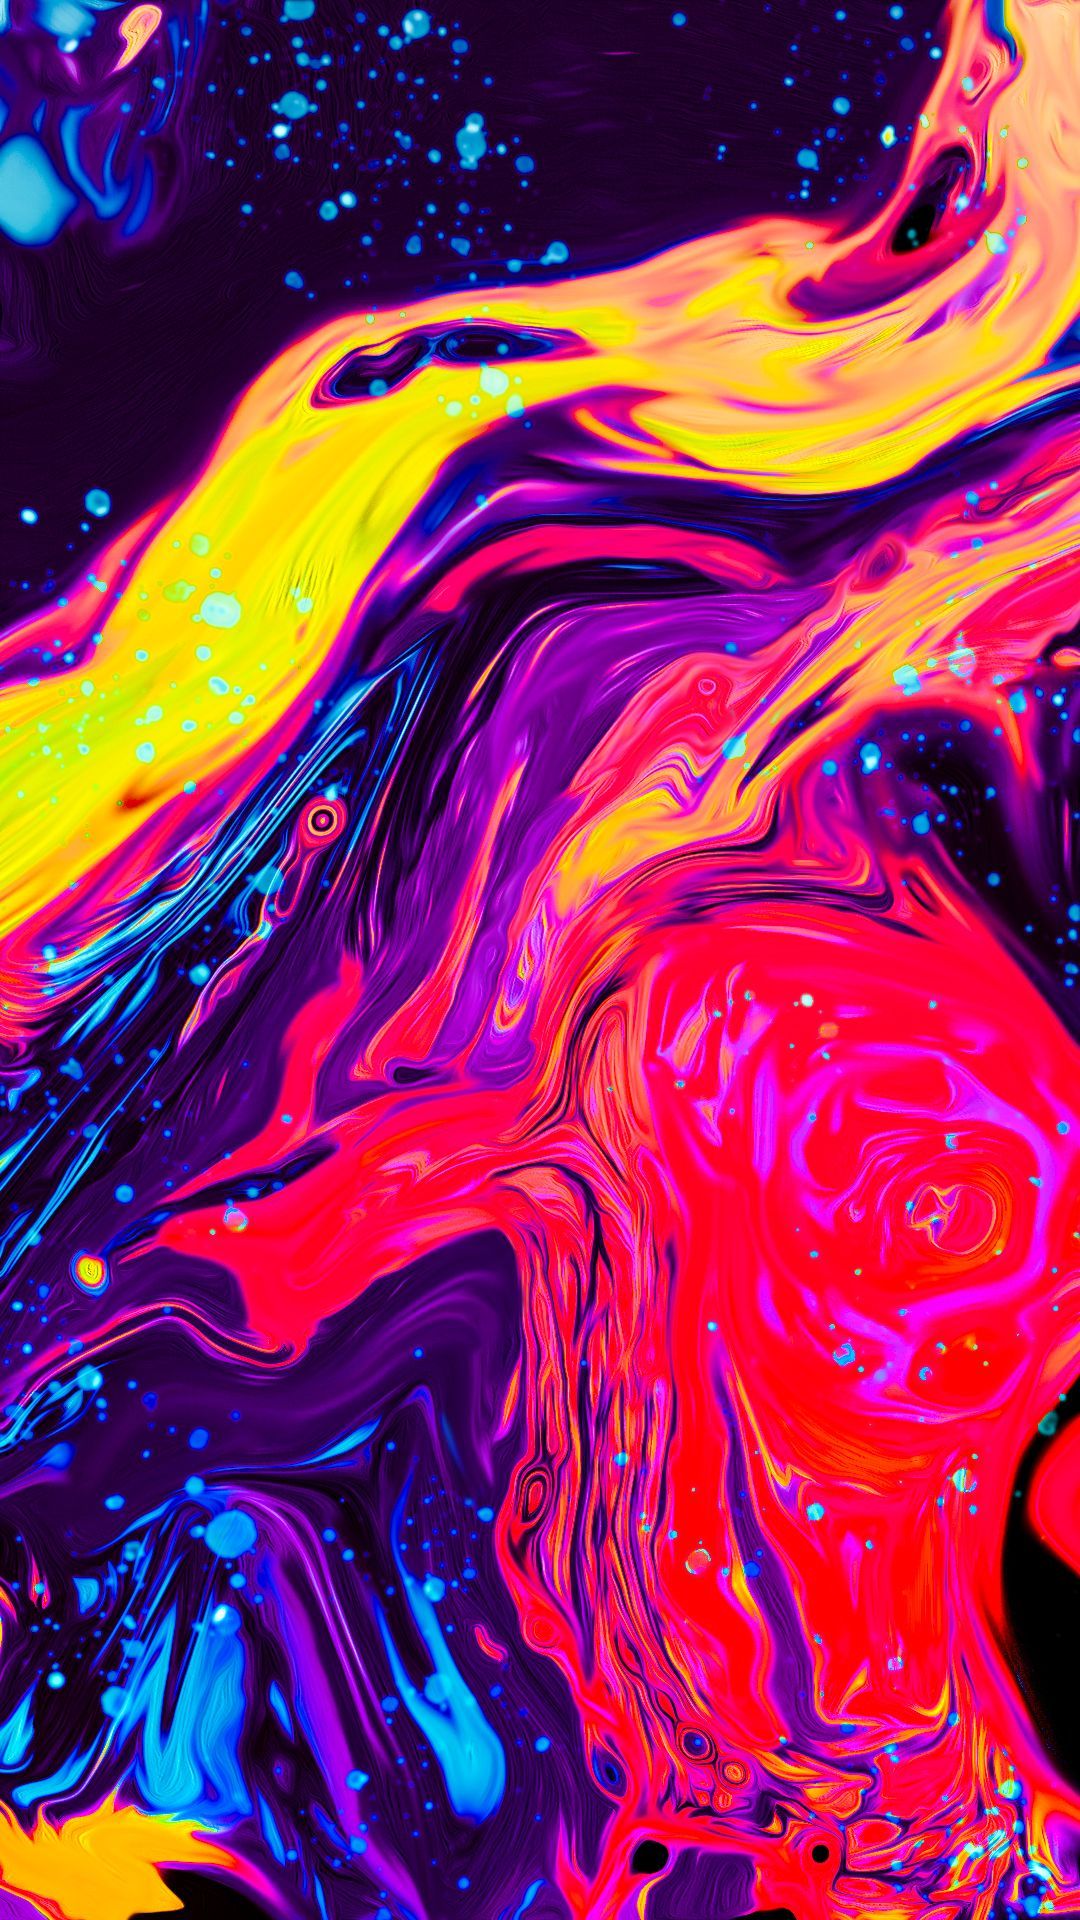 Art Colorful Iphone Wallpapers